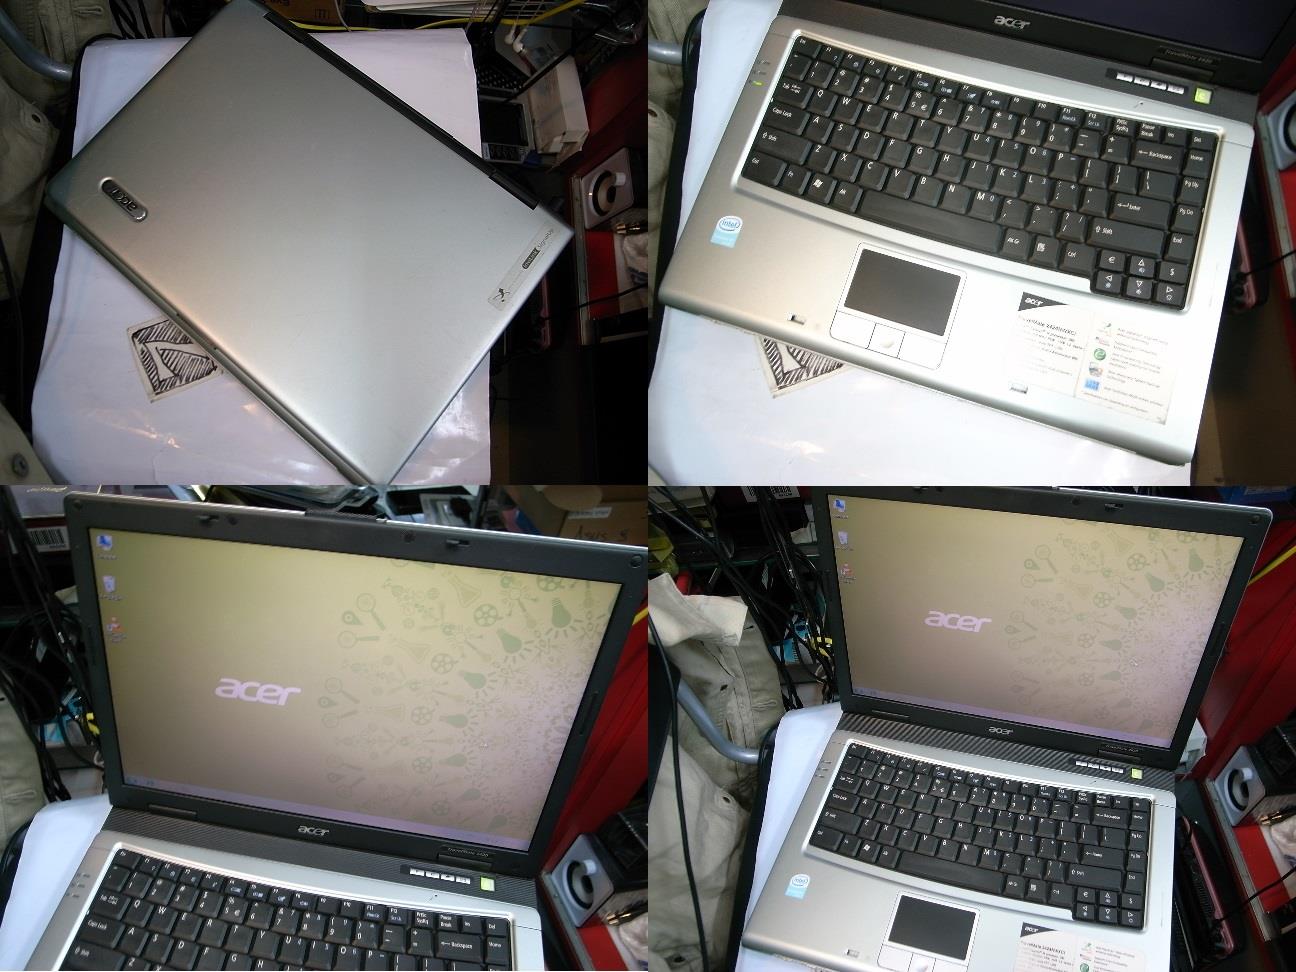 Acer 2420 drivers windows 7